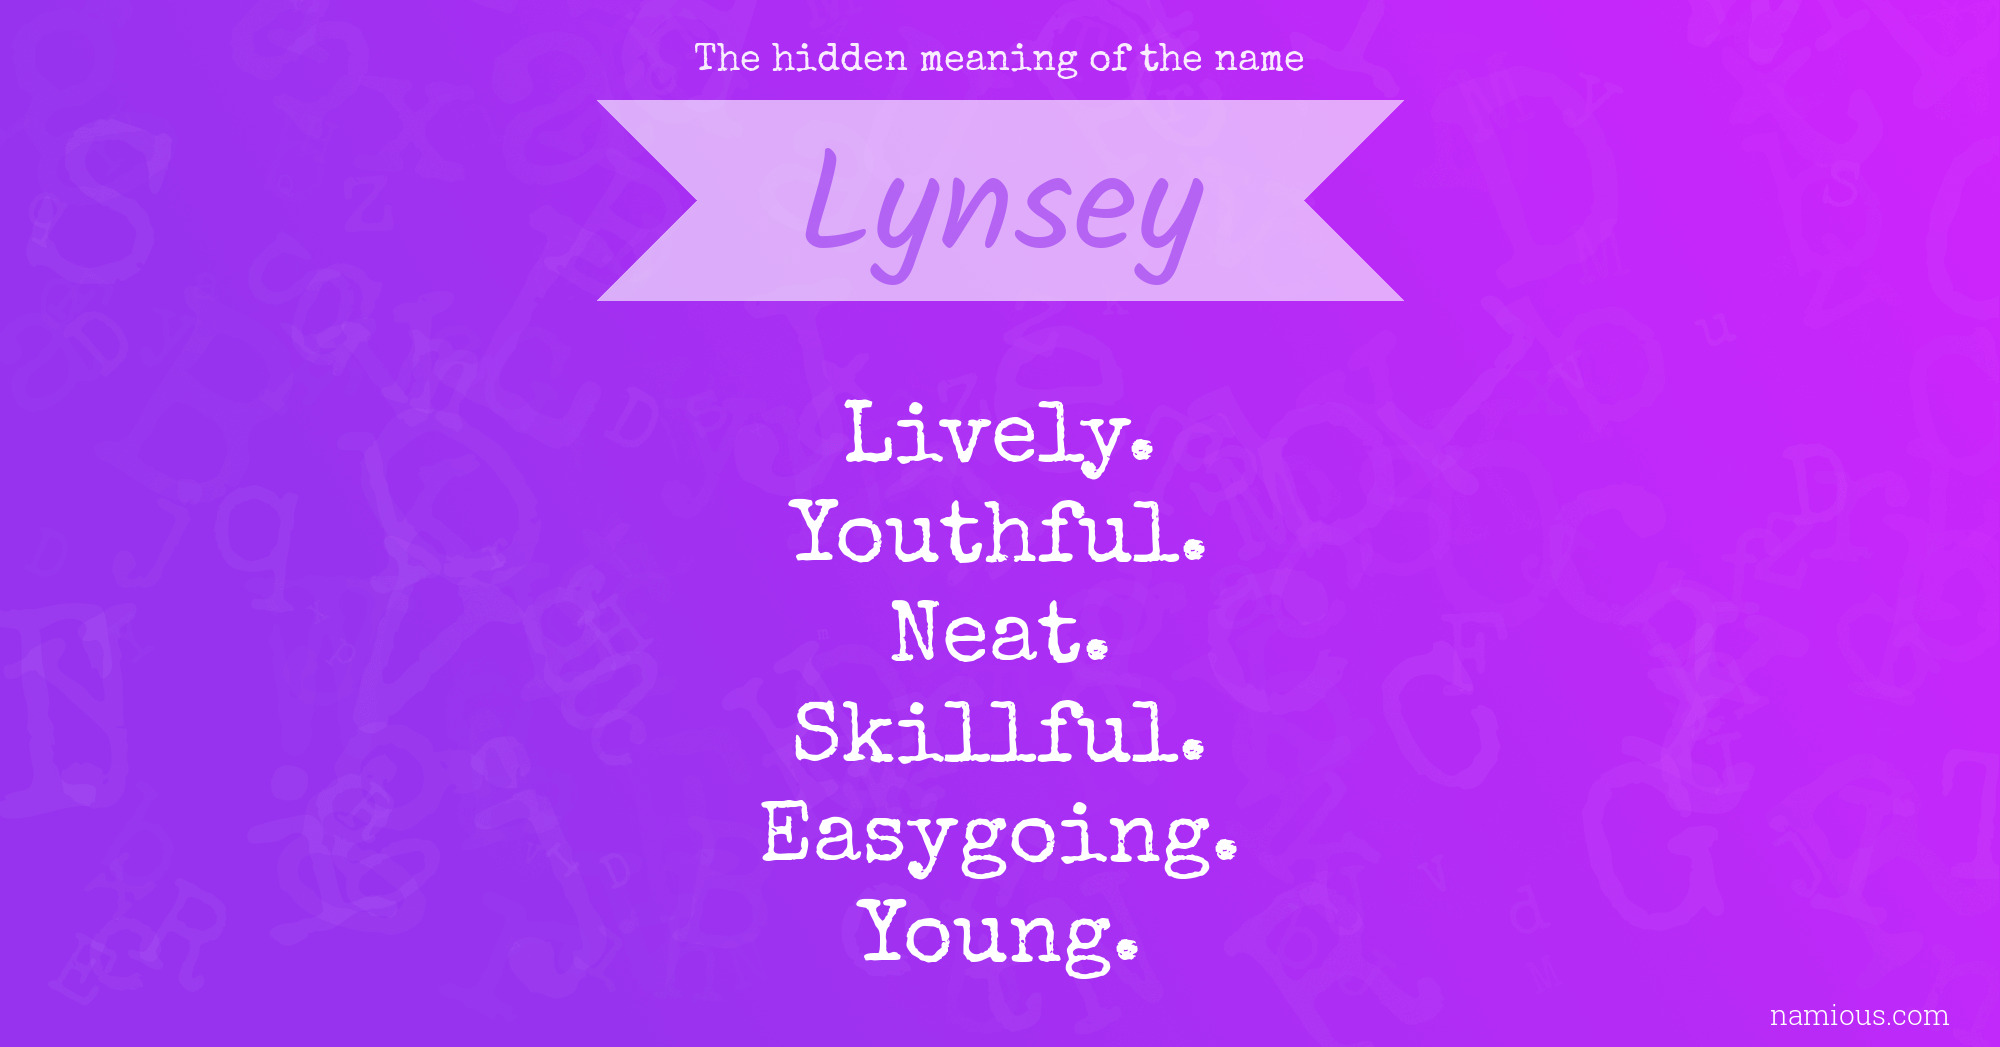 The hidden meaning of the name Lynsey